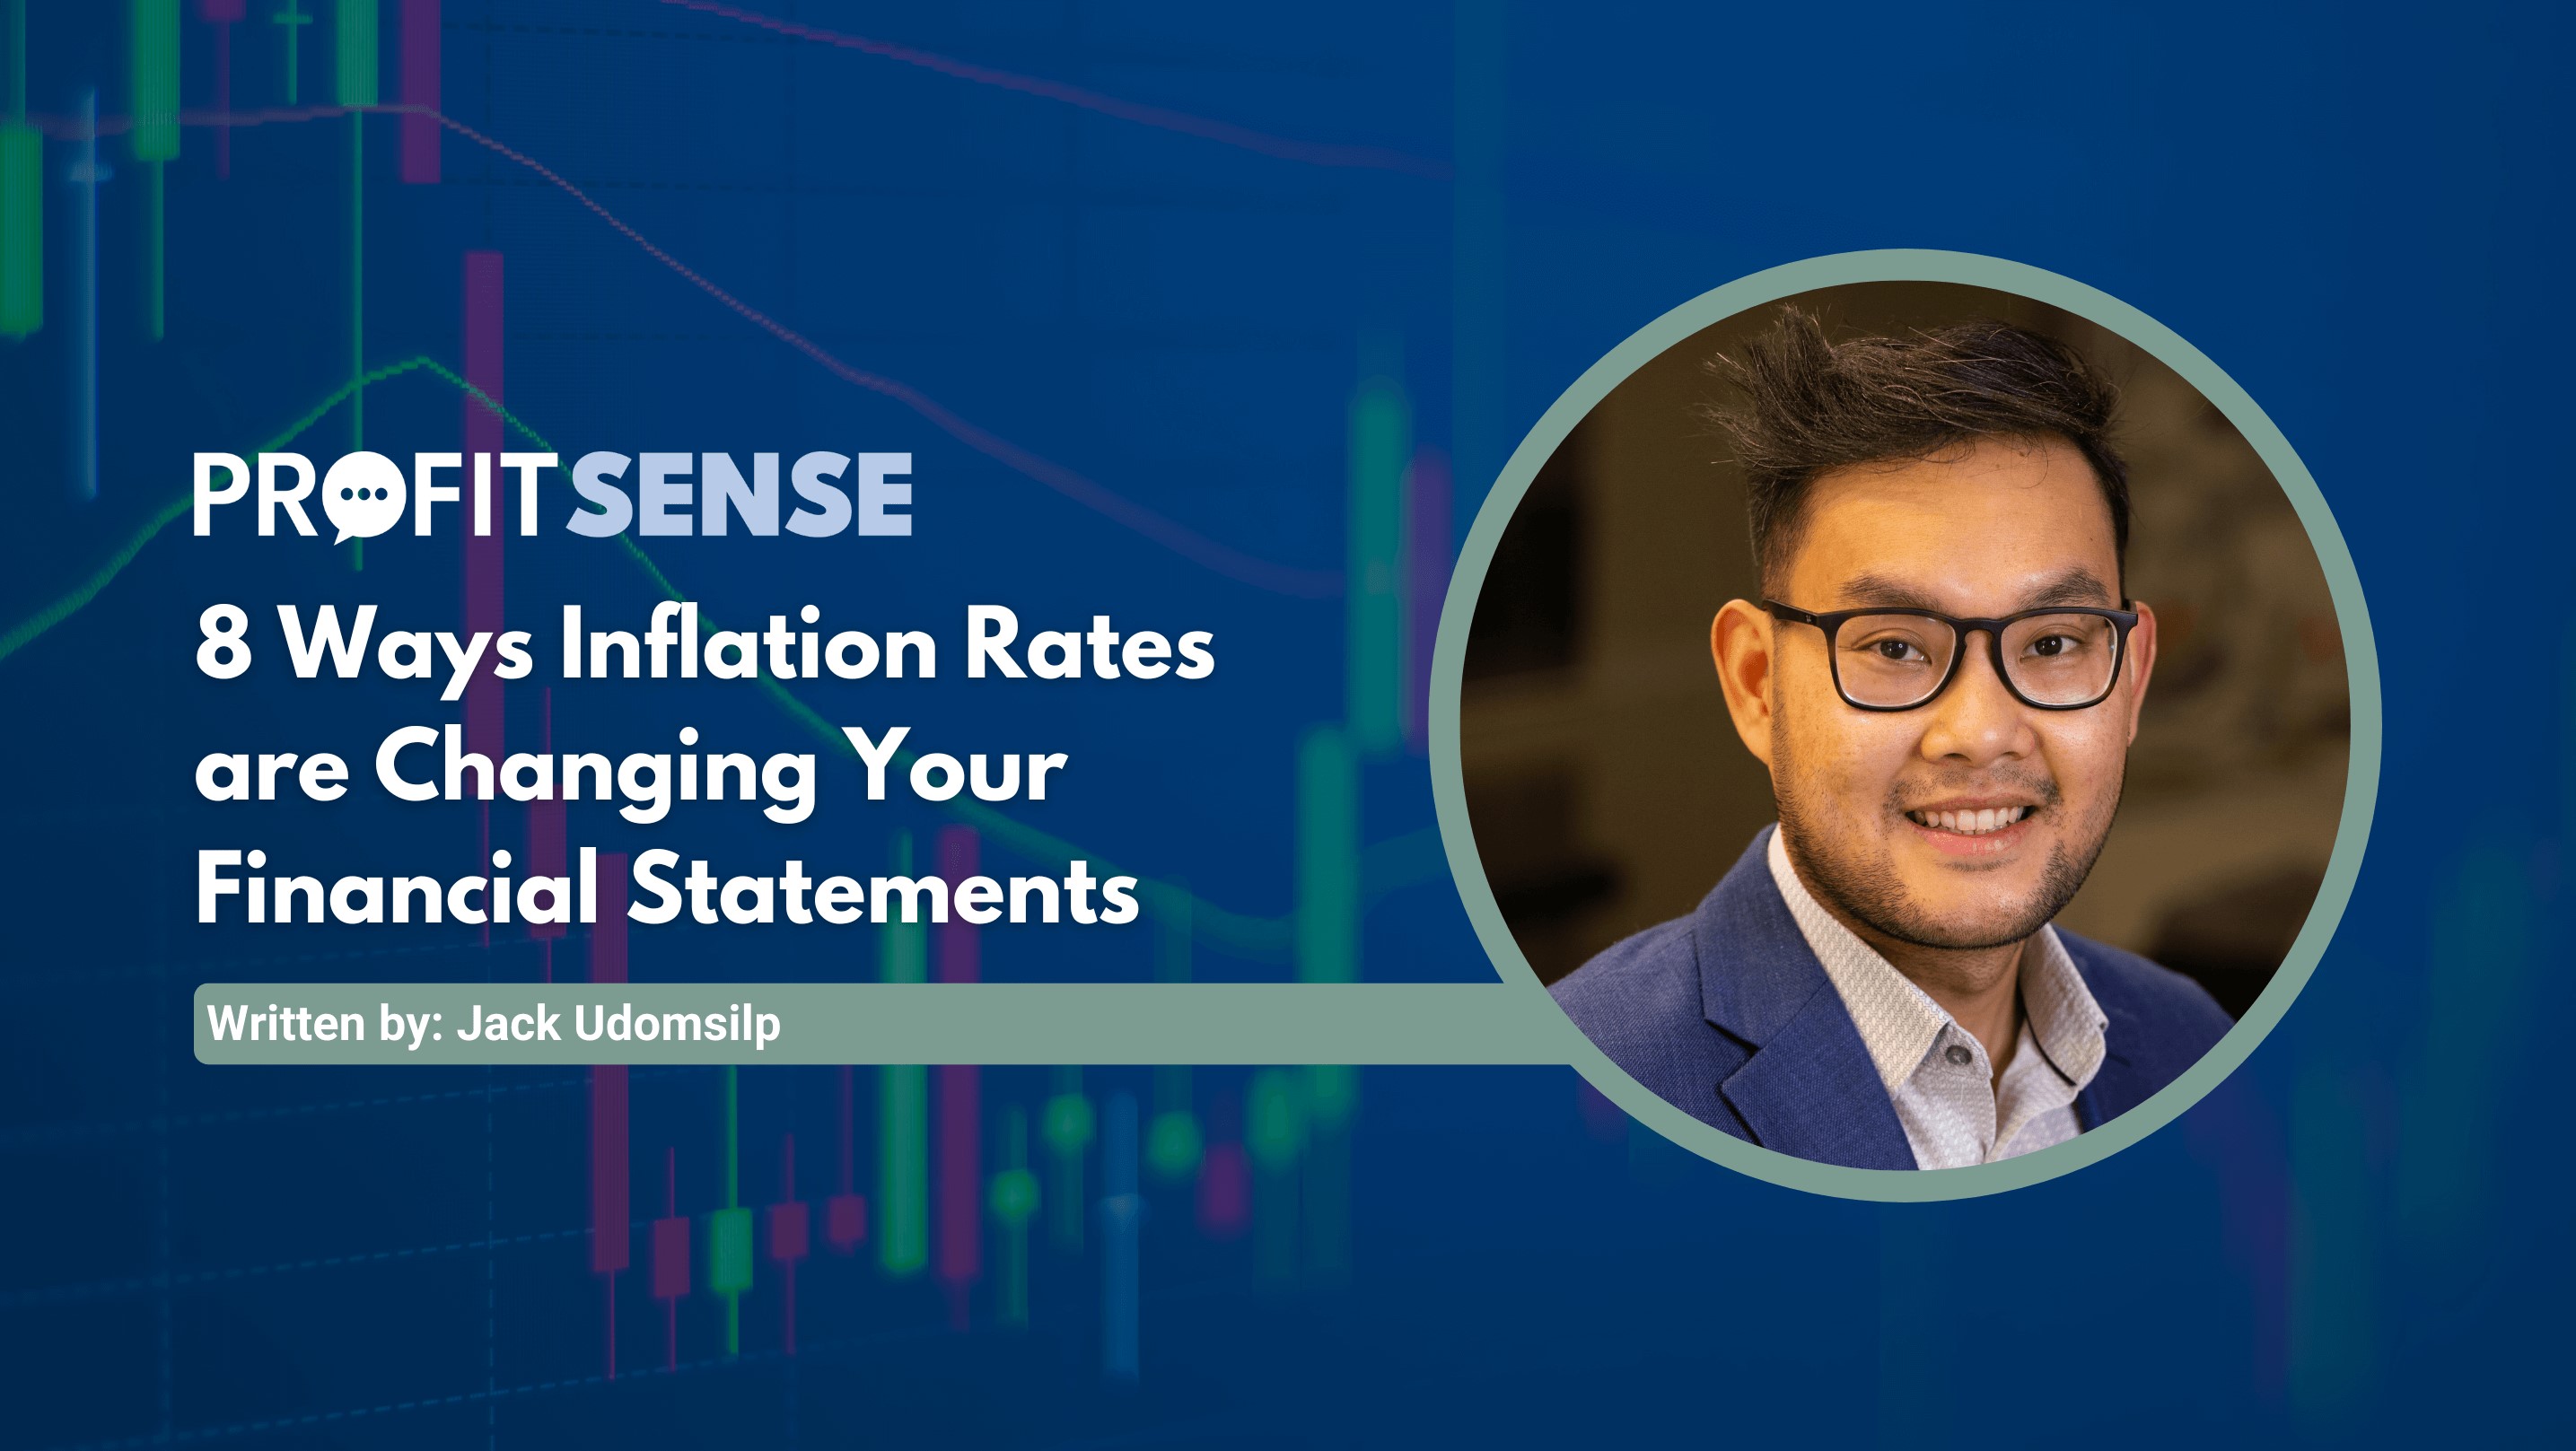 8 Ways Inflation Rates are Changing Your Financial Statements